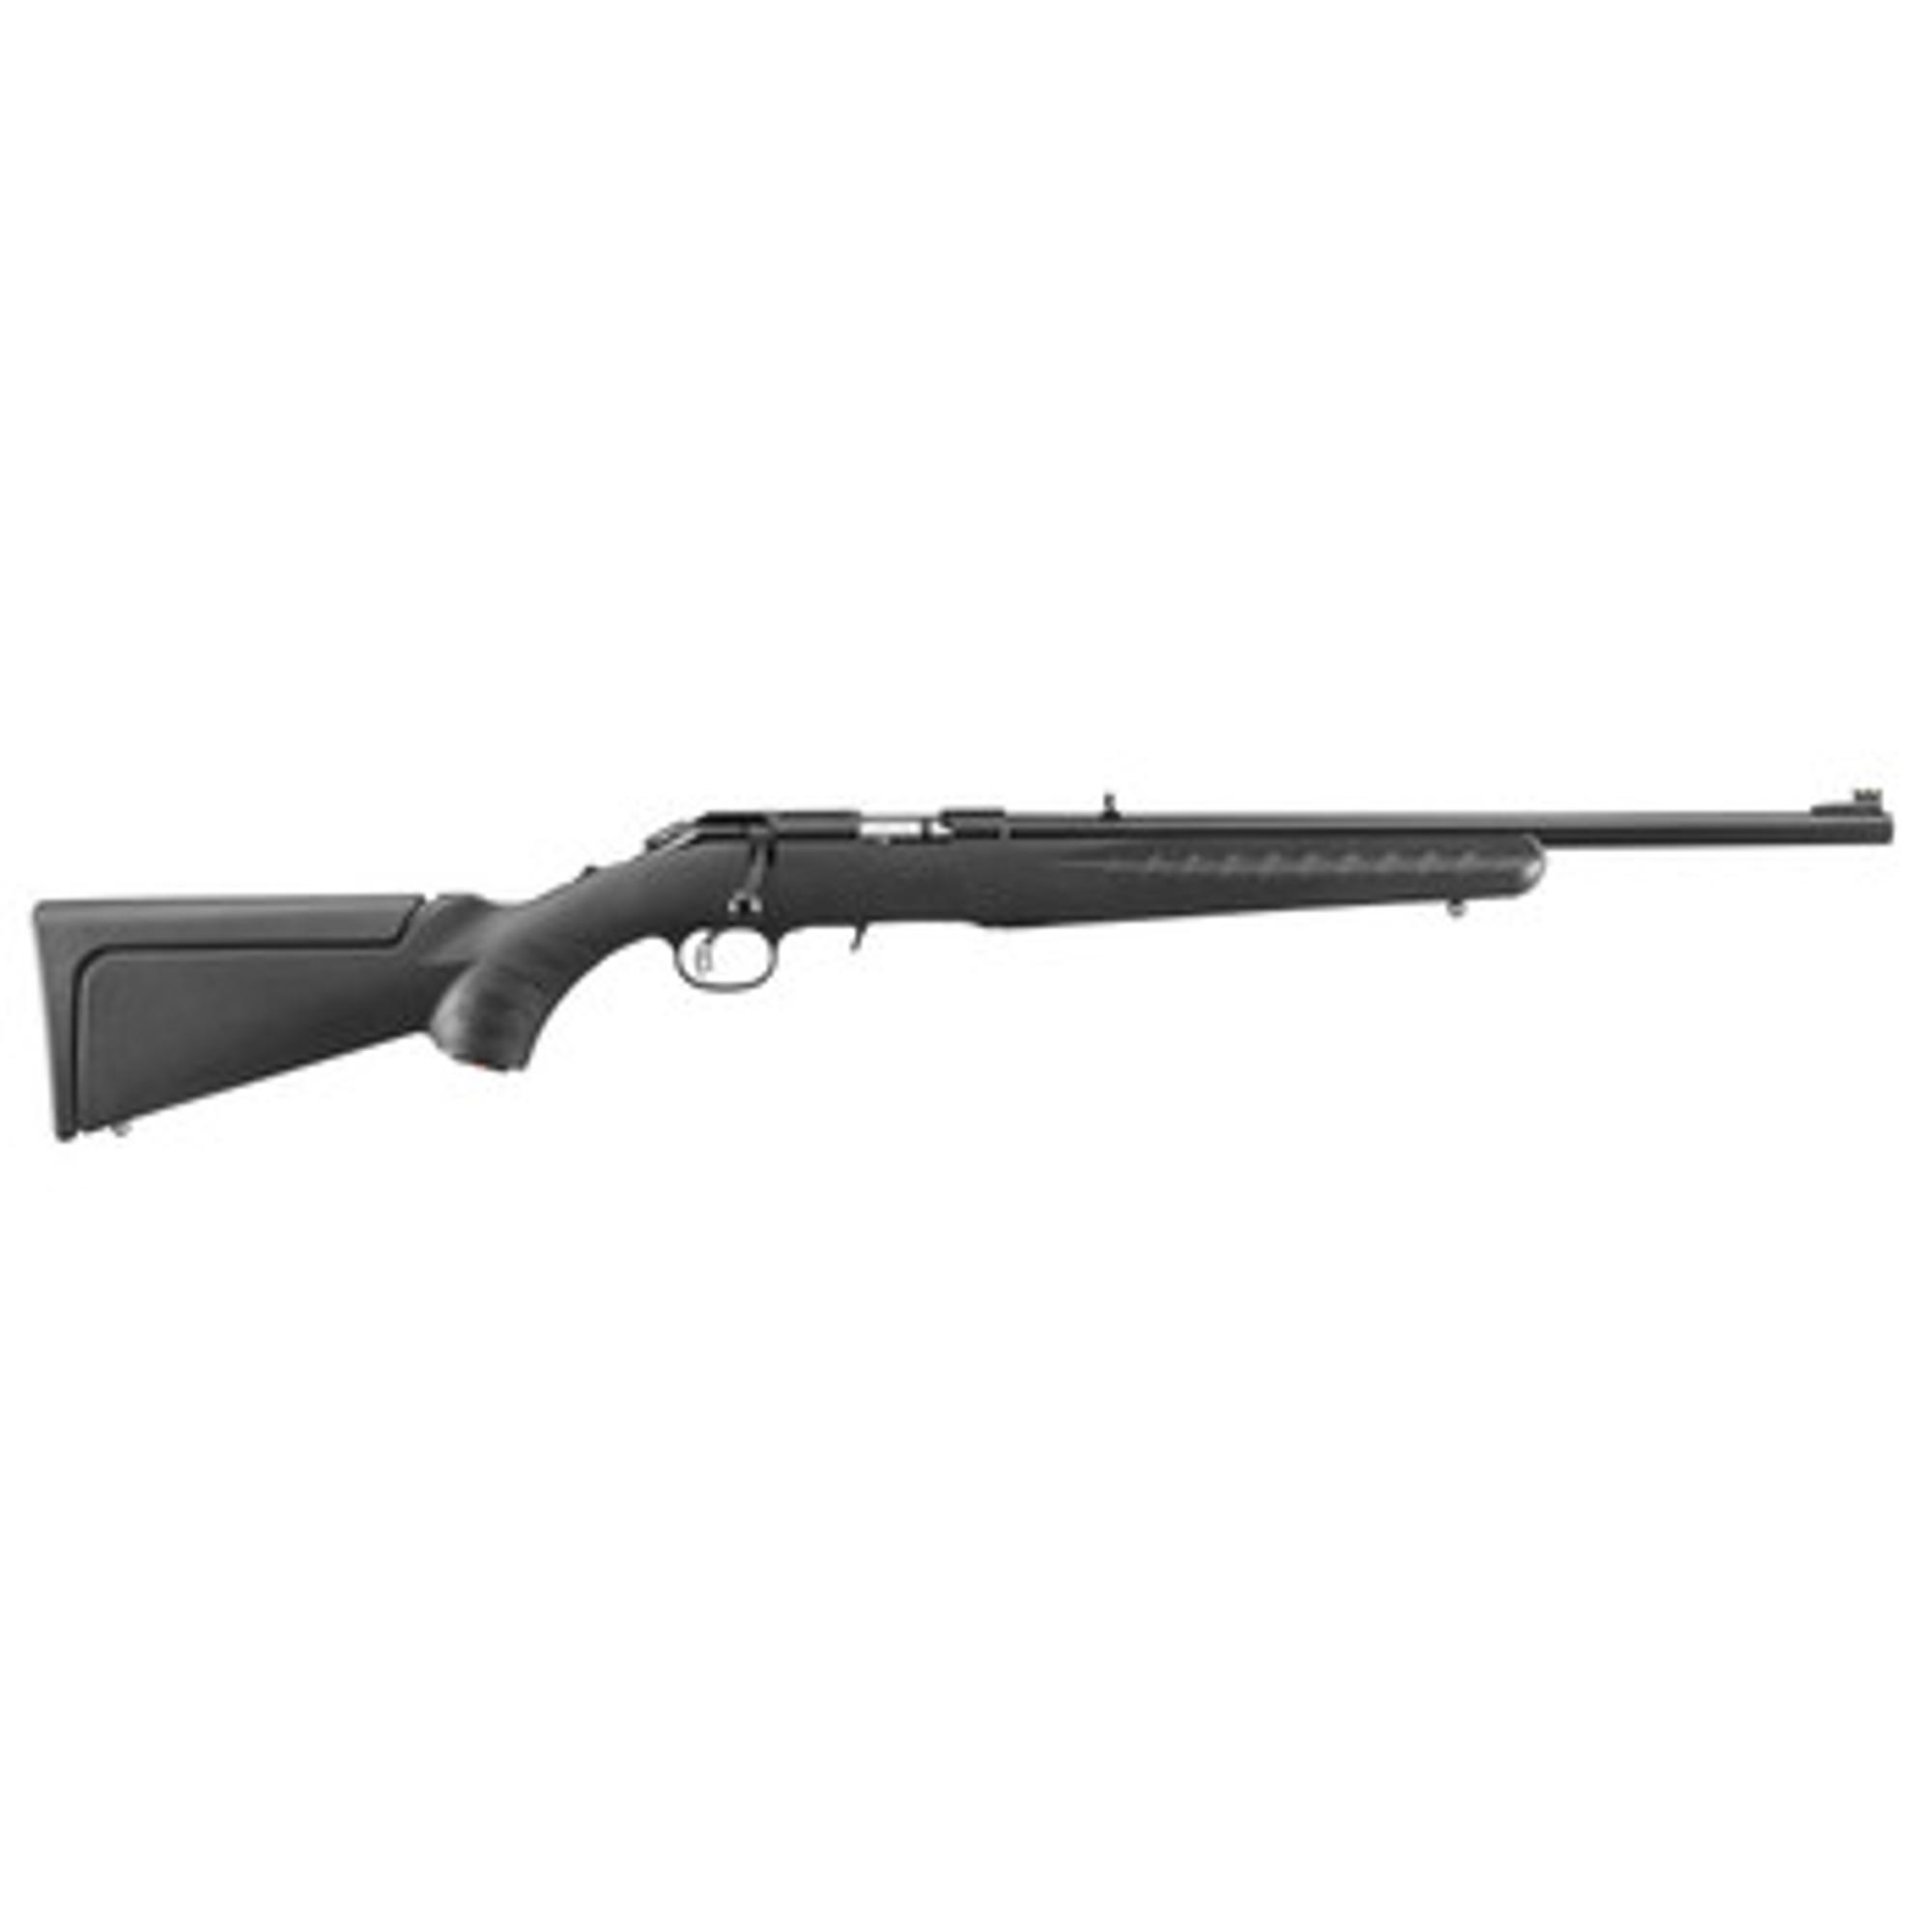 Ruger American Compact 17hmr